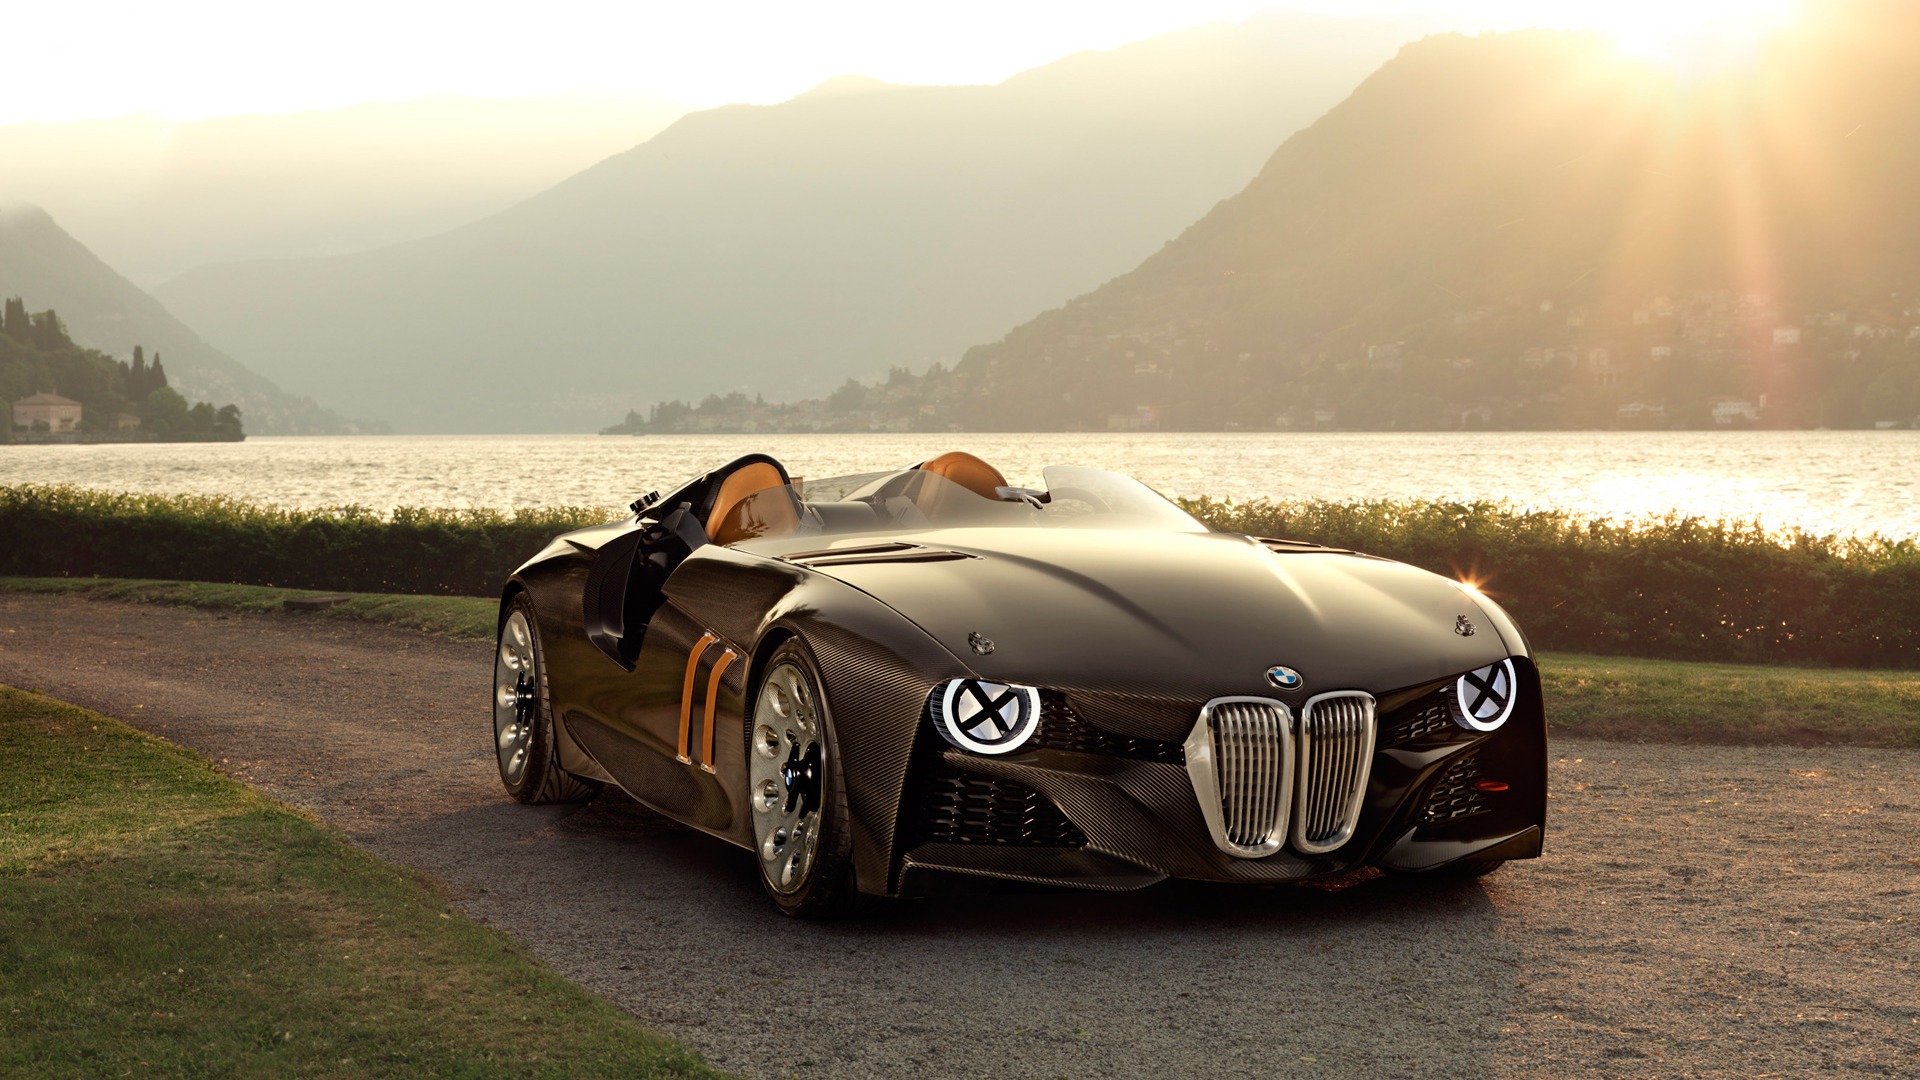 BMW 328 Hommage - 2011 HD wallpapers #28 - 1920x1080